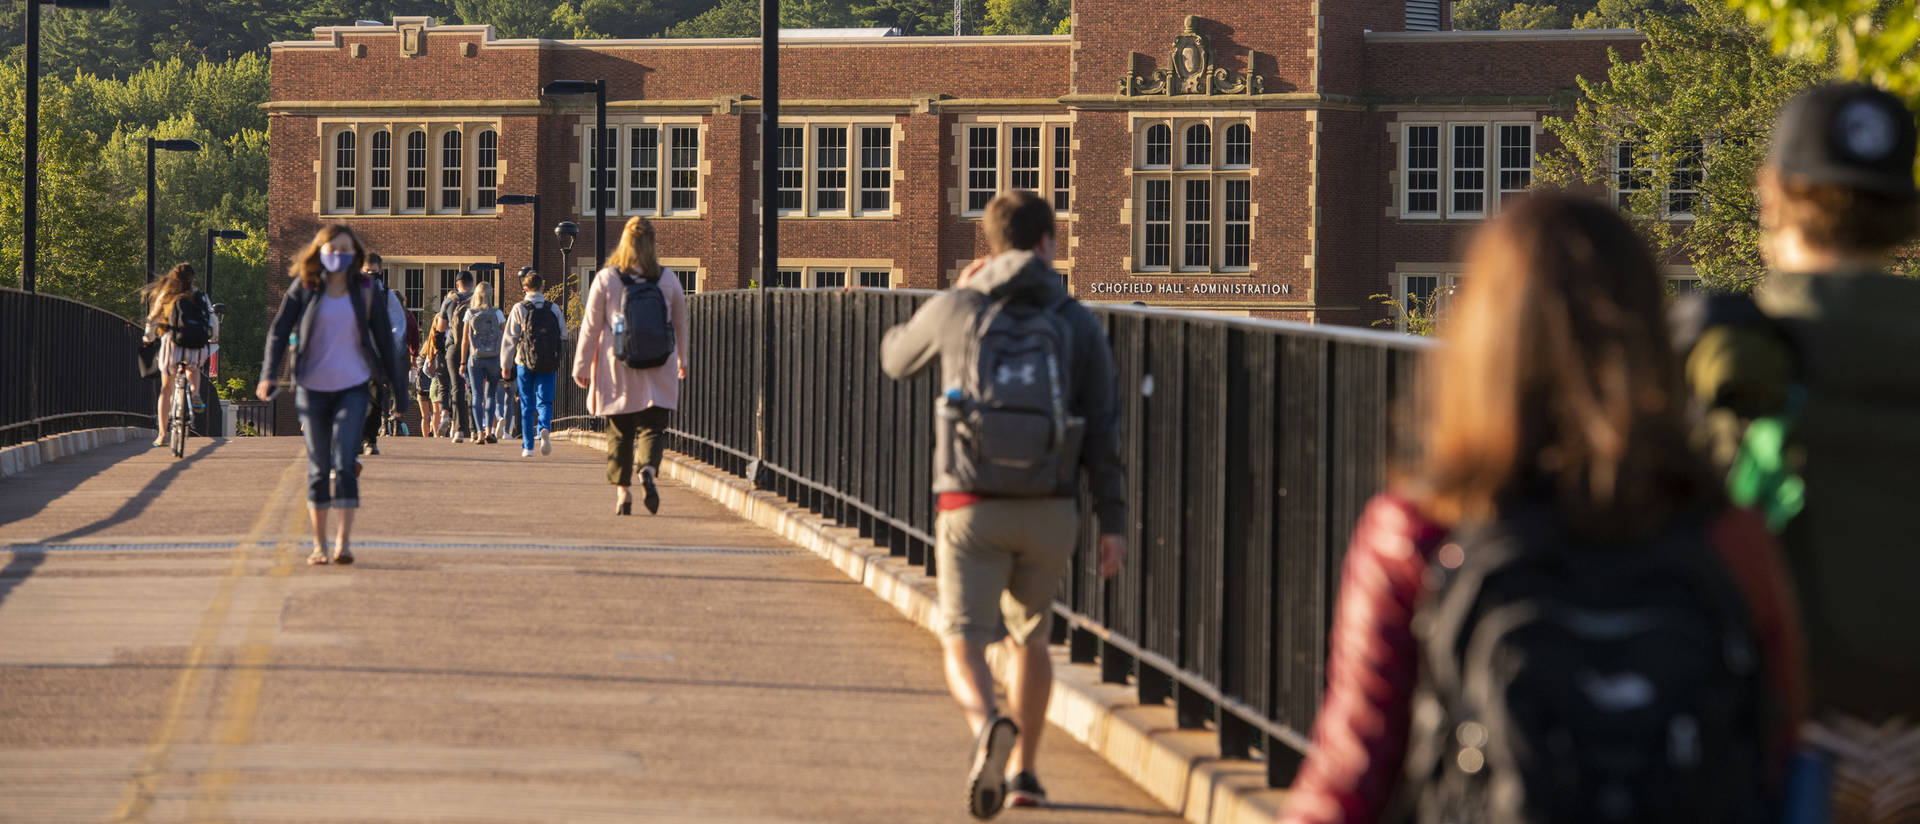 Students walk across footbridge in masks during first day of fall 2020 semester.